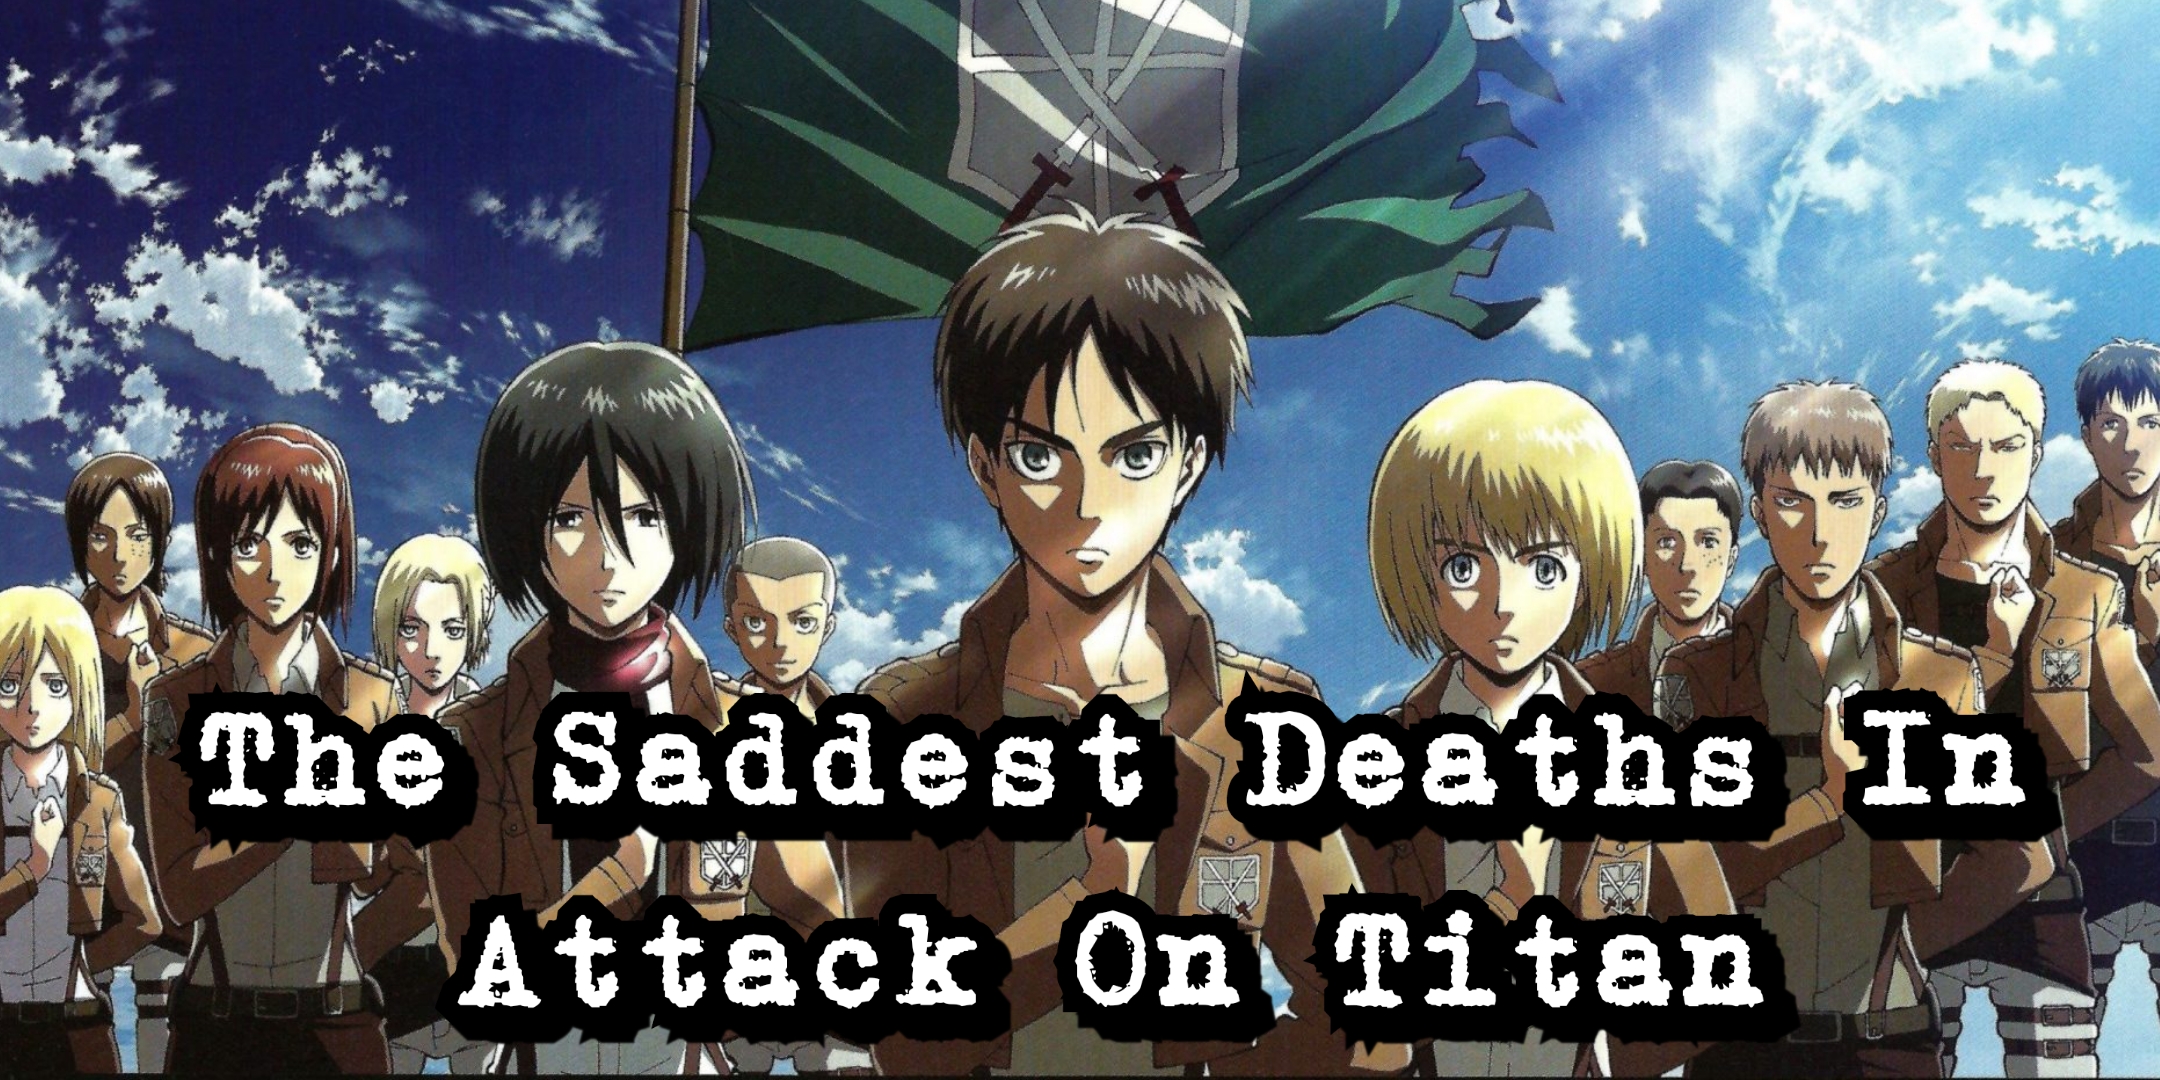 Anime: 'Attack On Titan' - The Saddest Deaths - Bell of Lost Souls